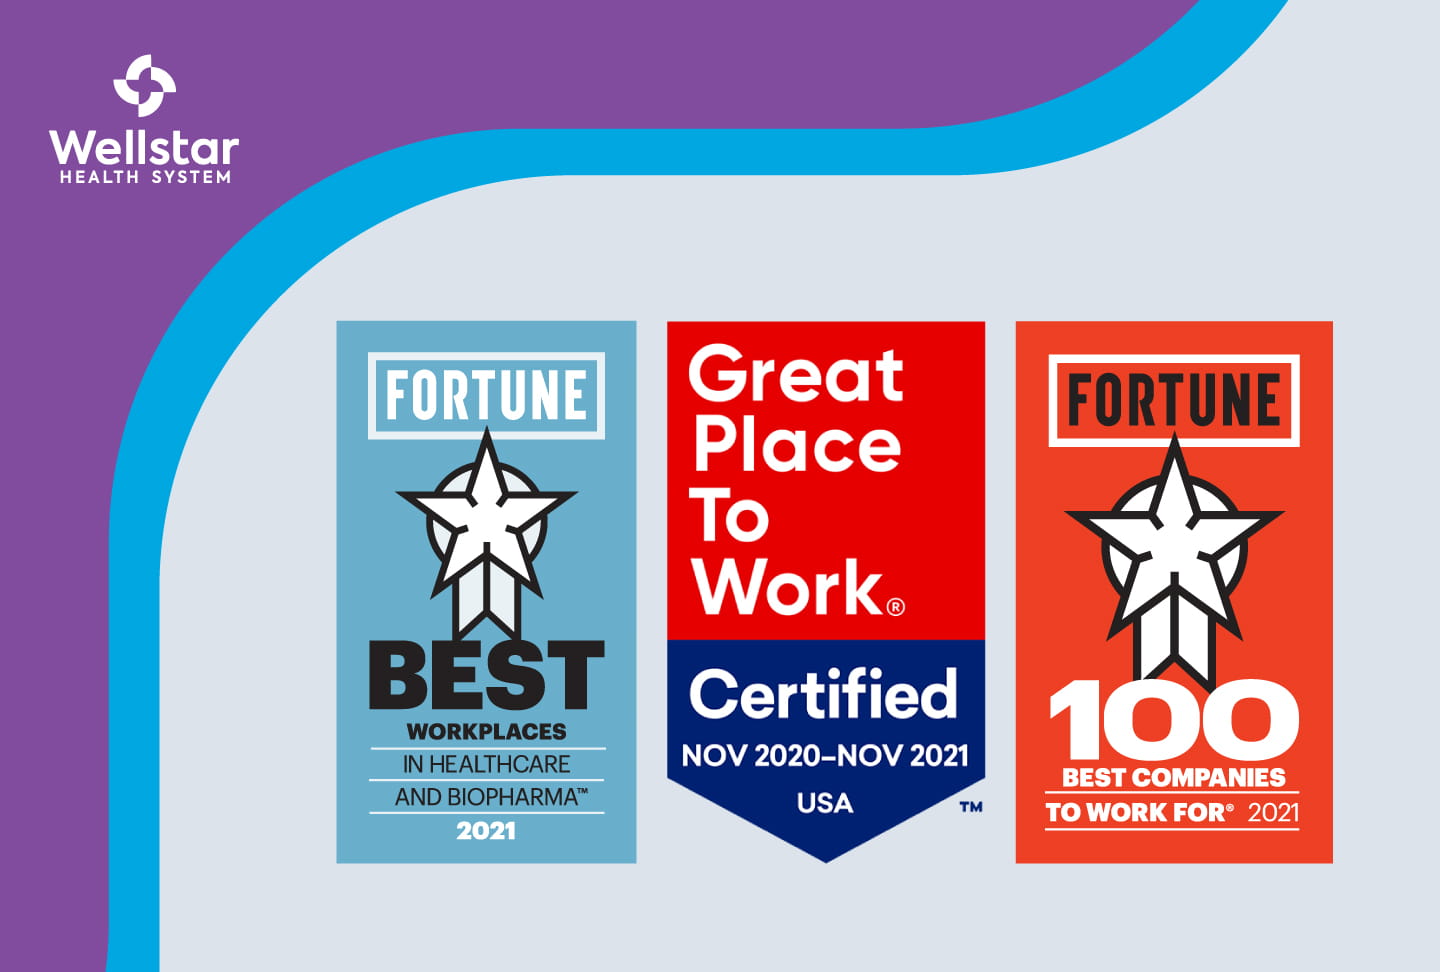 Wellstar named Great Place to Work® & Fortune 100 Best Companies to Work For® Image